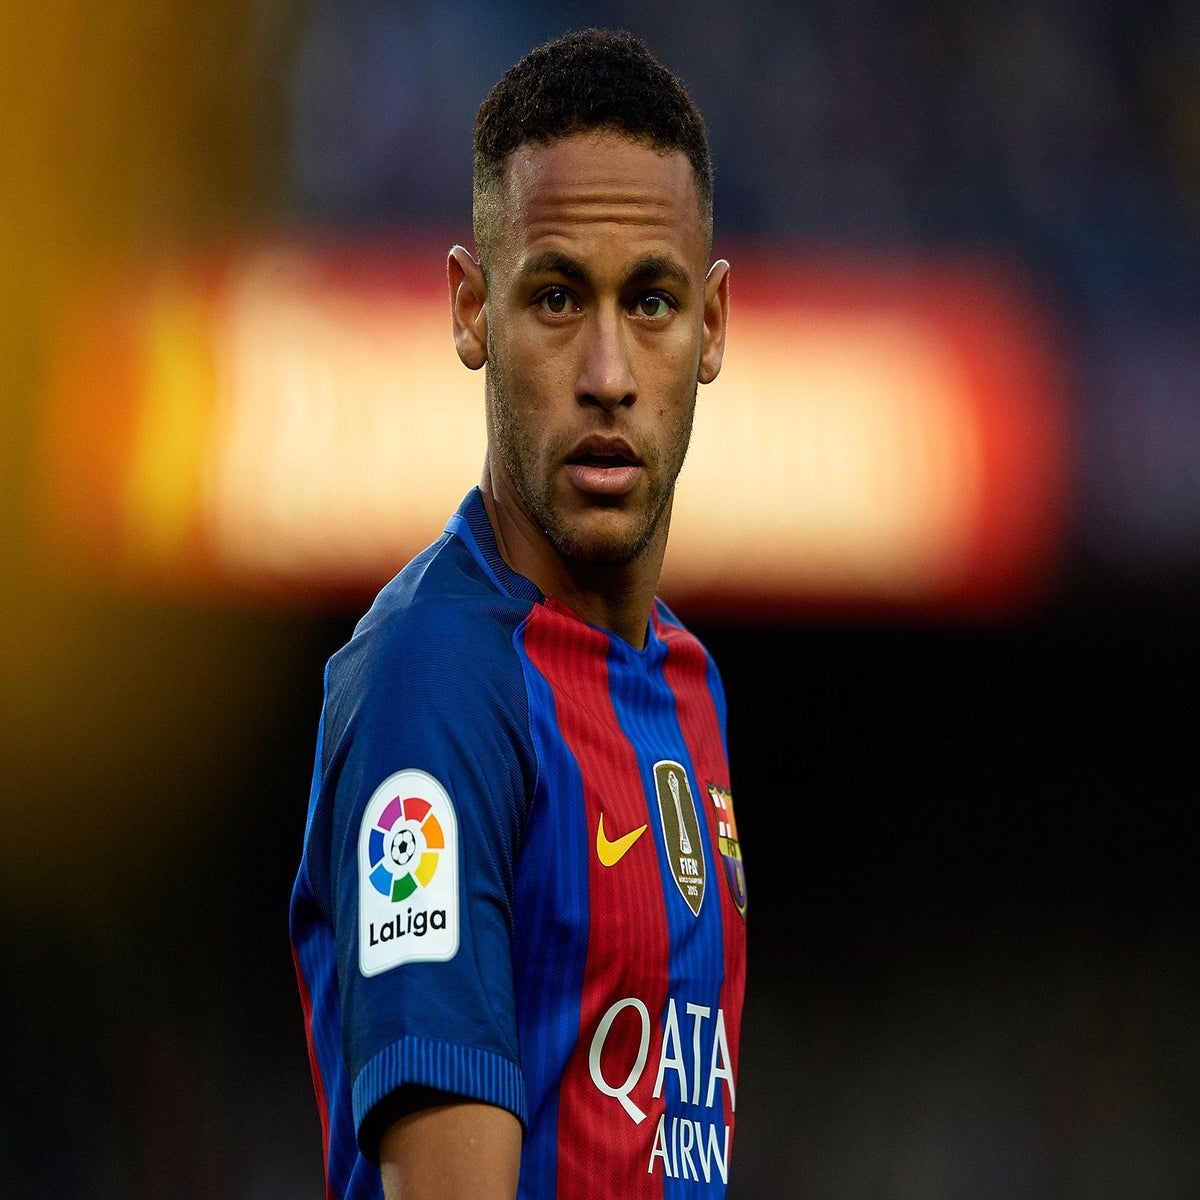 Is Neymar a Barca legend? You asked, we answered - Football